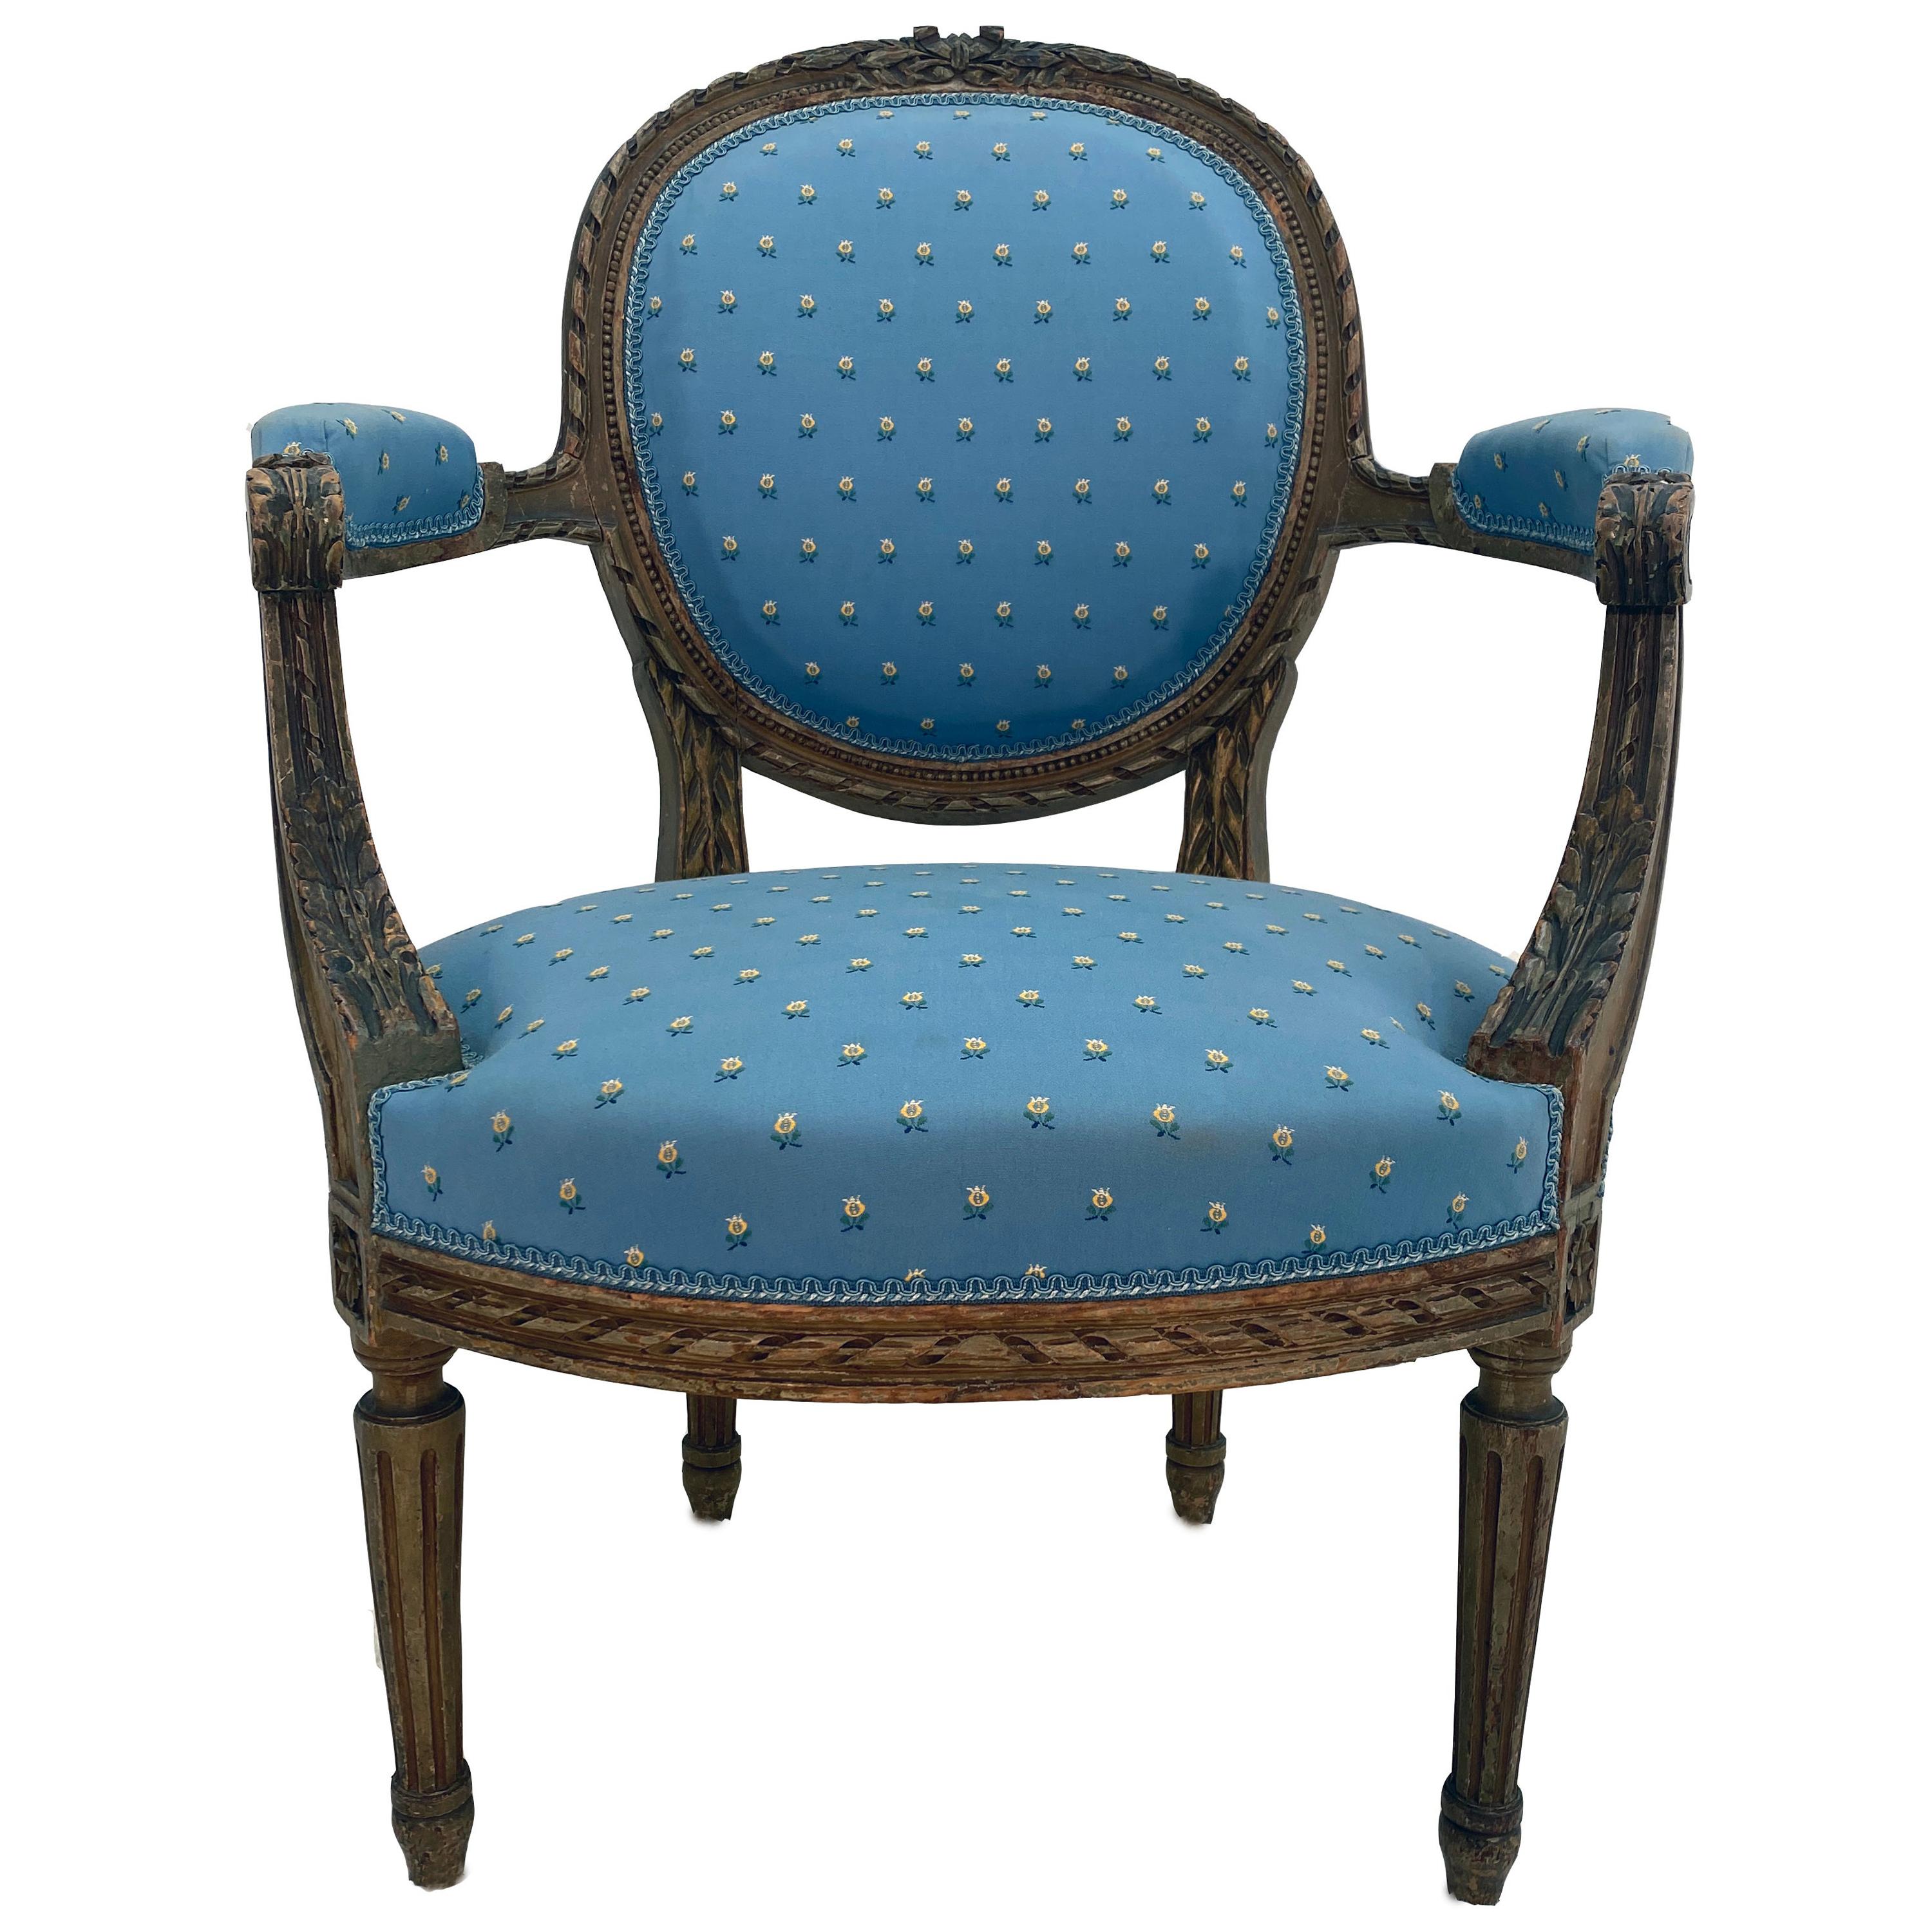 Painted 19th Century French Louis XVI Style Fauteuil Arm Chair For Sale